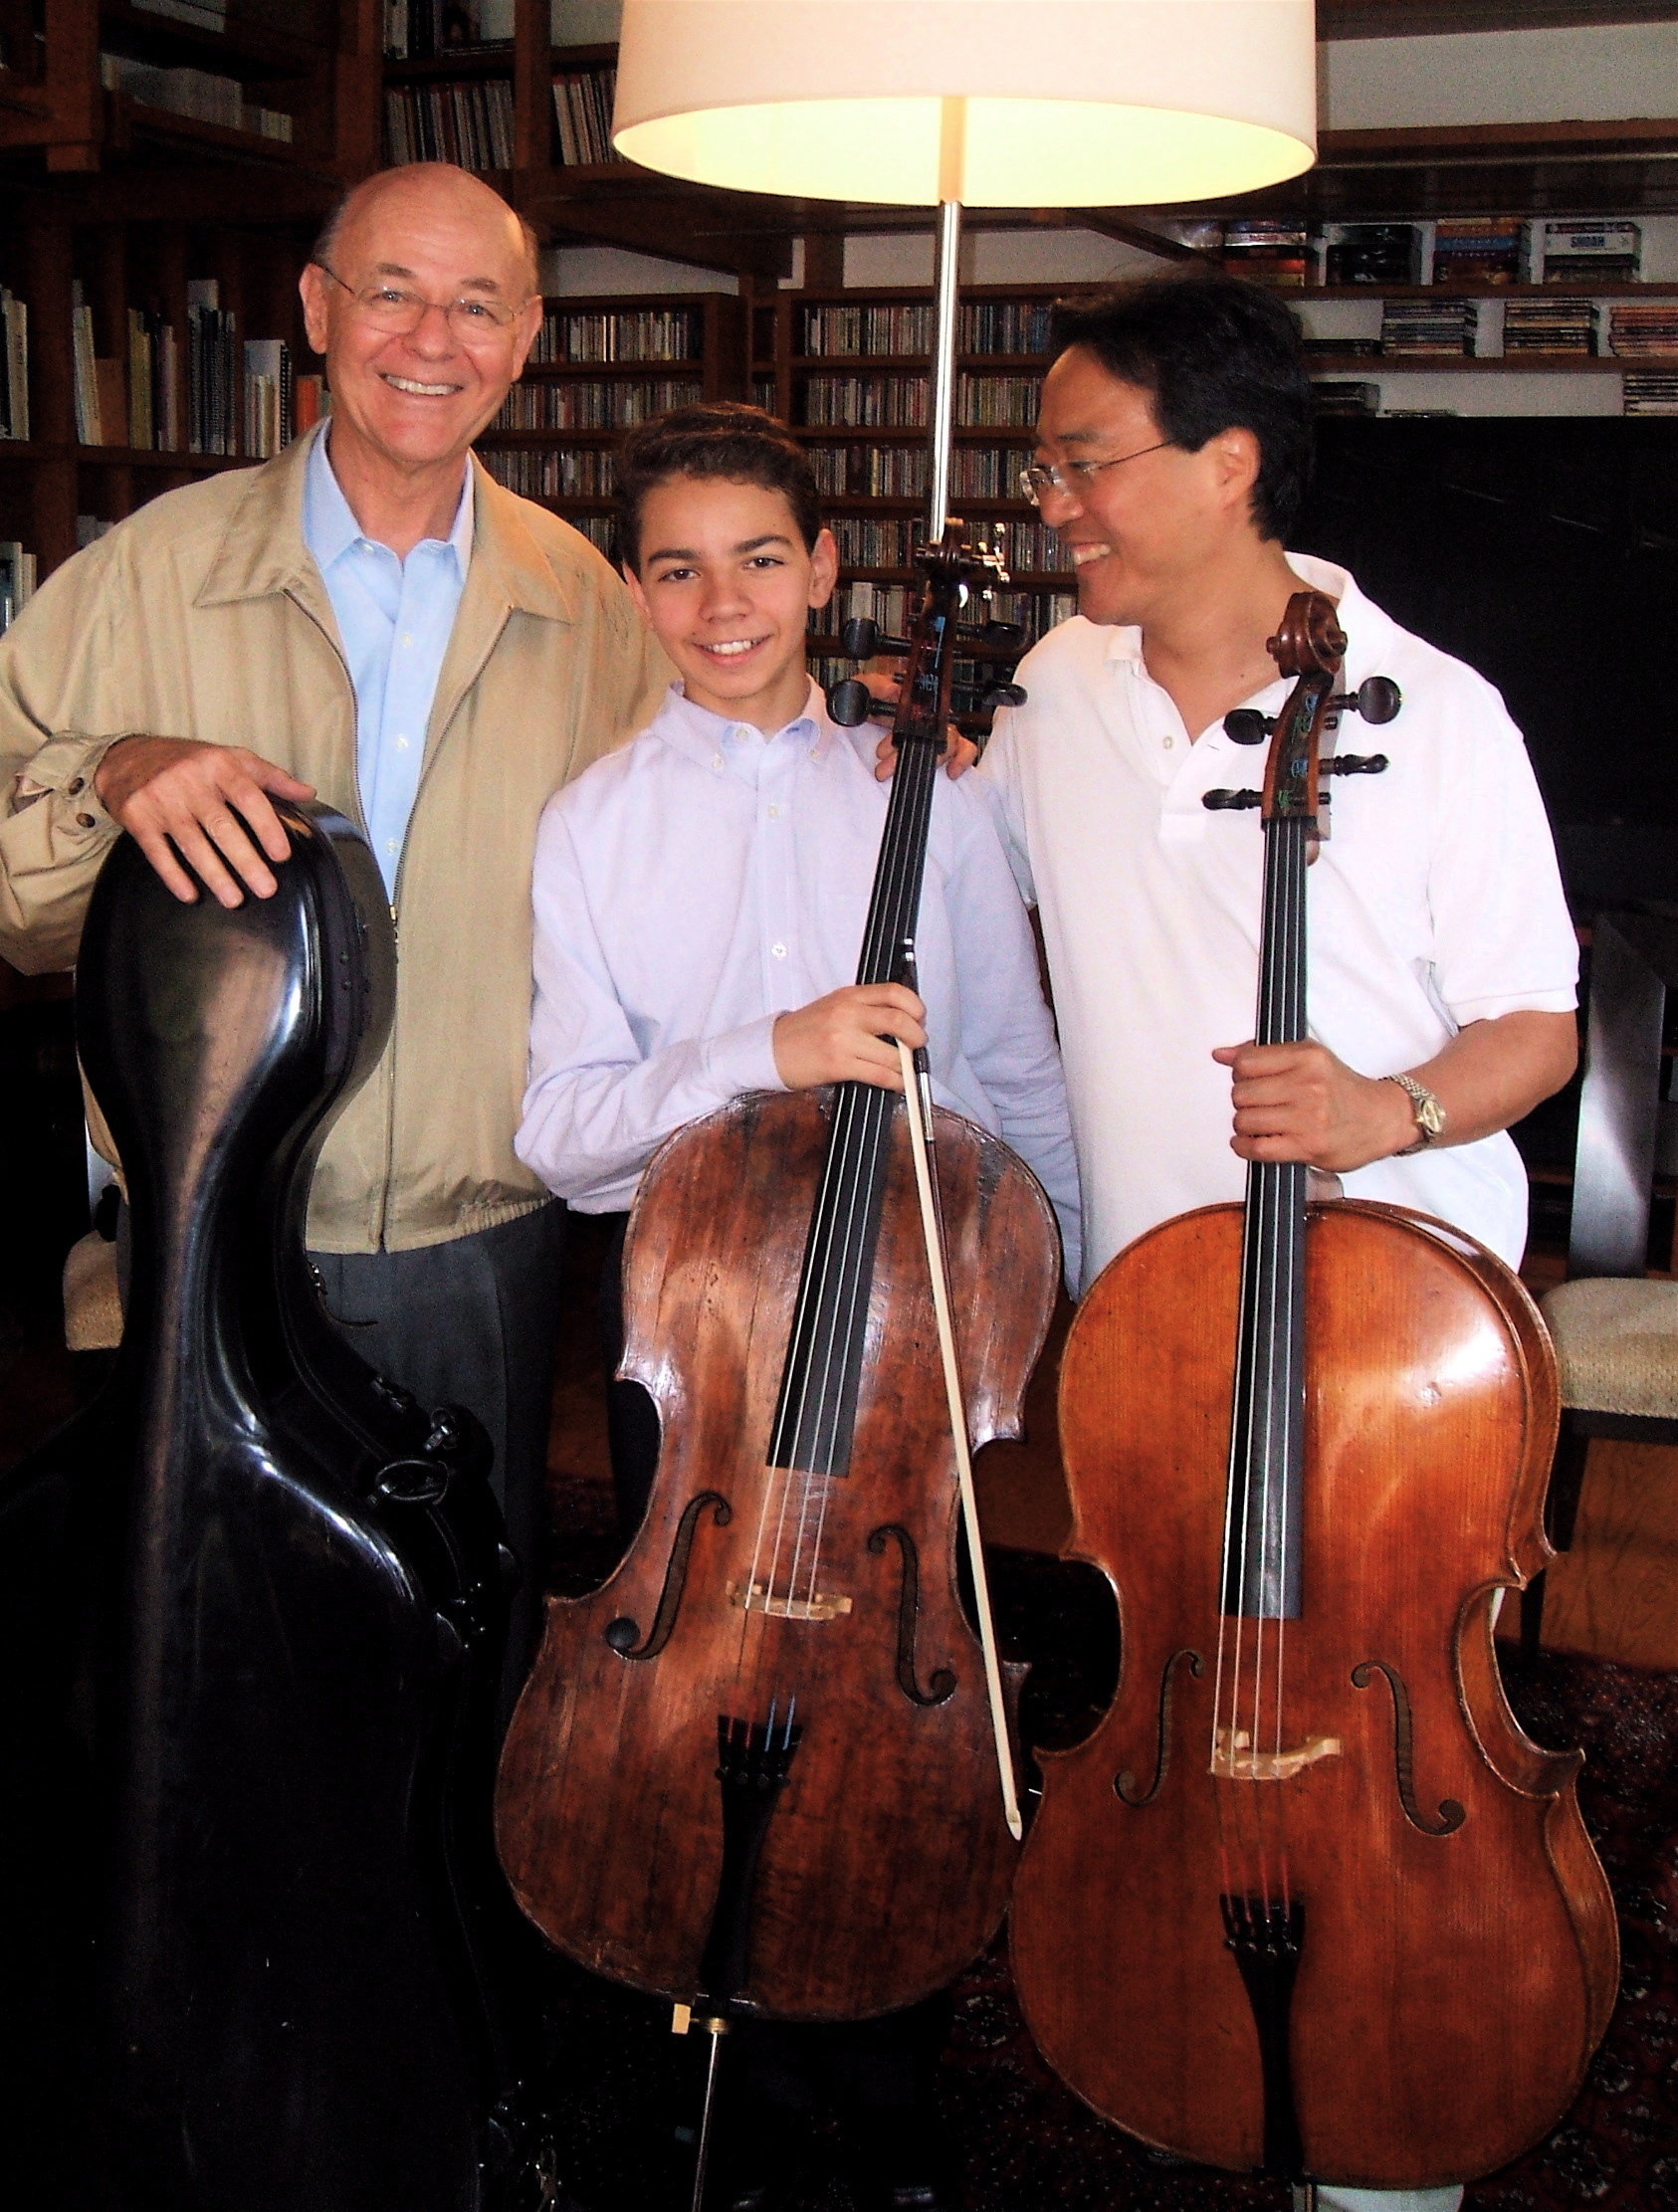 Juan-Salvador Carrasco between Mexico's foremost cellist, Carlos Prieto (left), and the world's most famous cellist, Yo-Yo Ma (right).